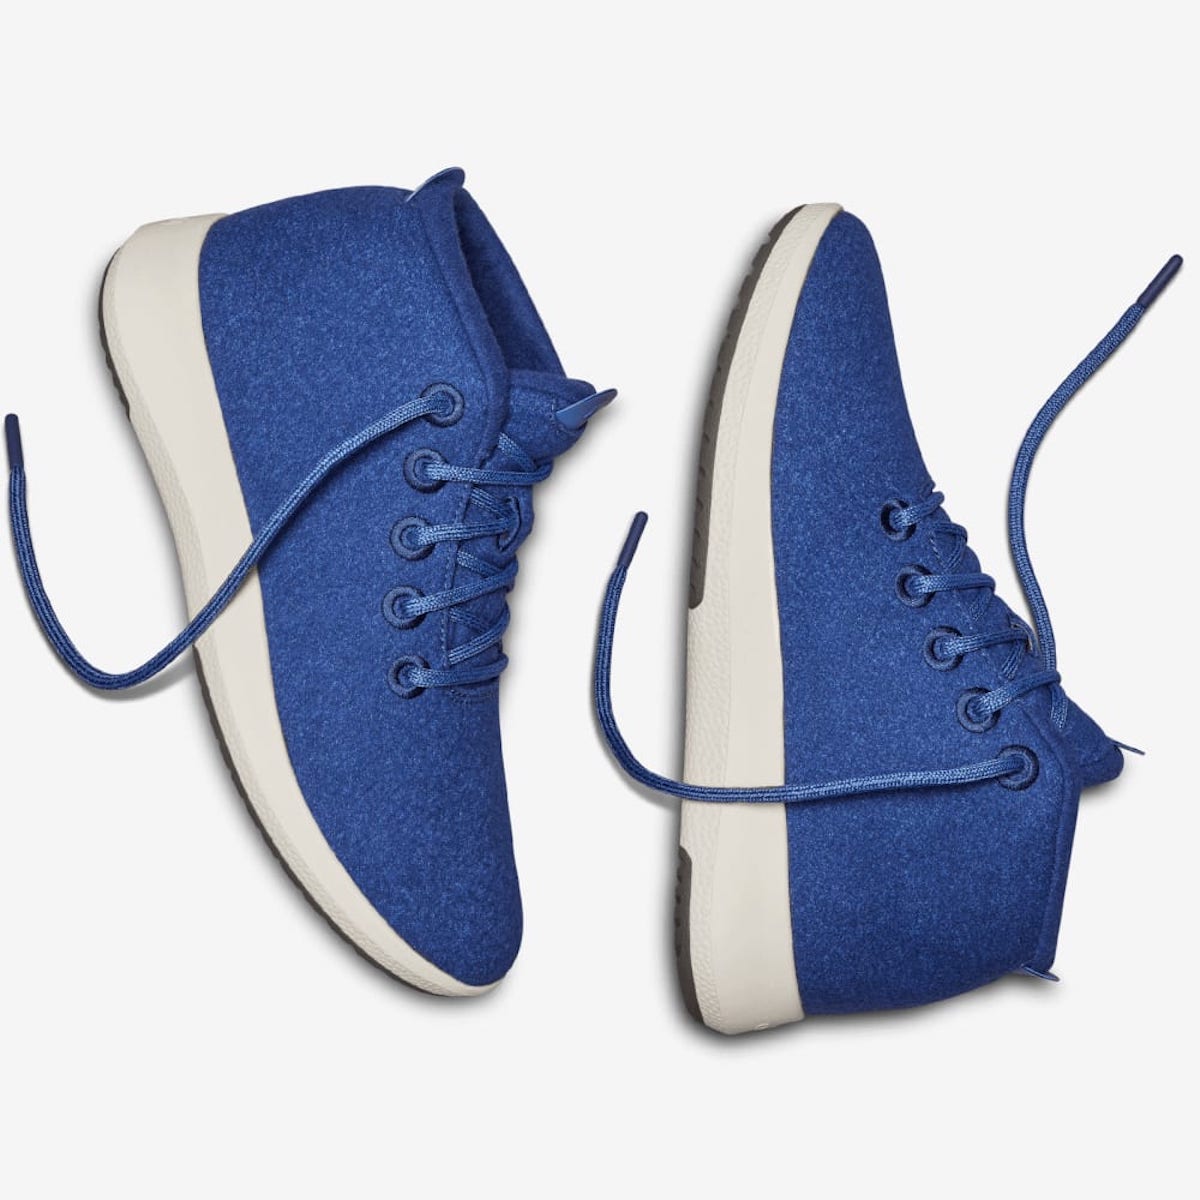 Buy > allbirds shoes stores > in stock